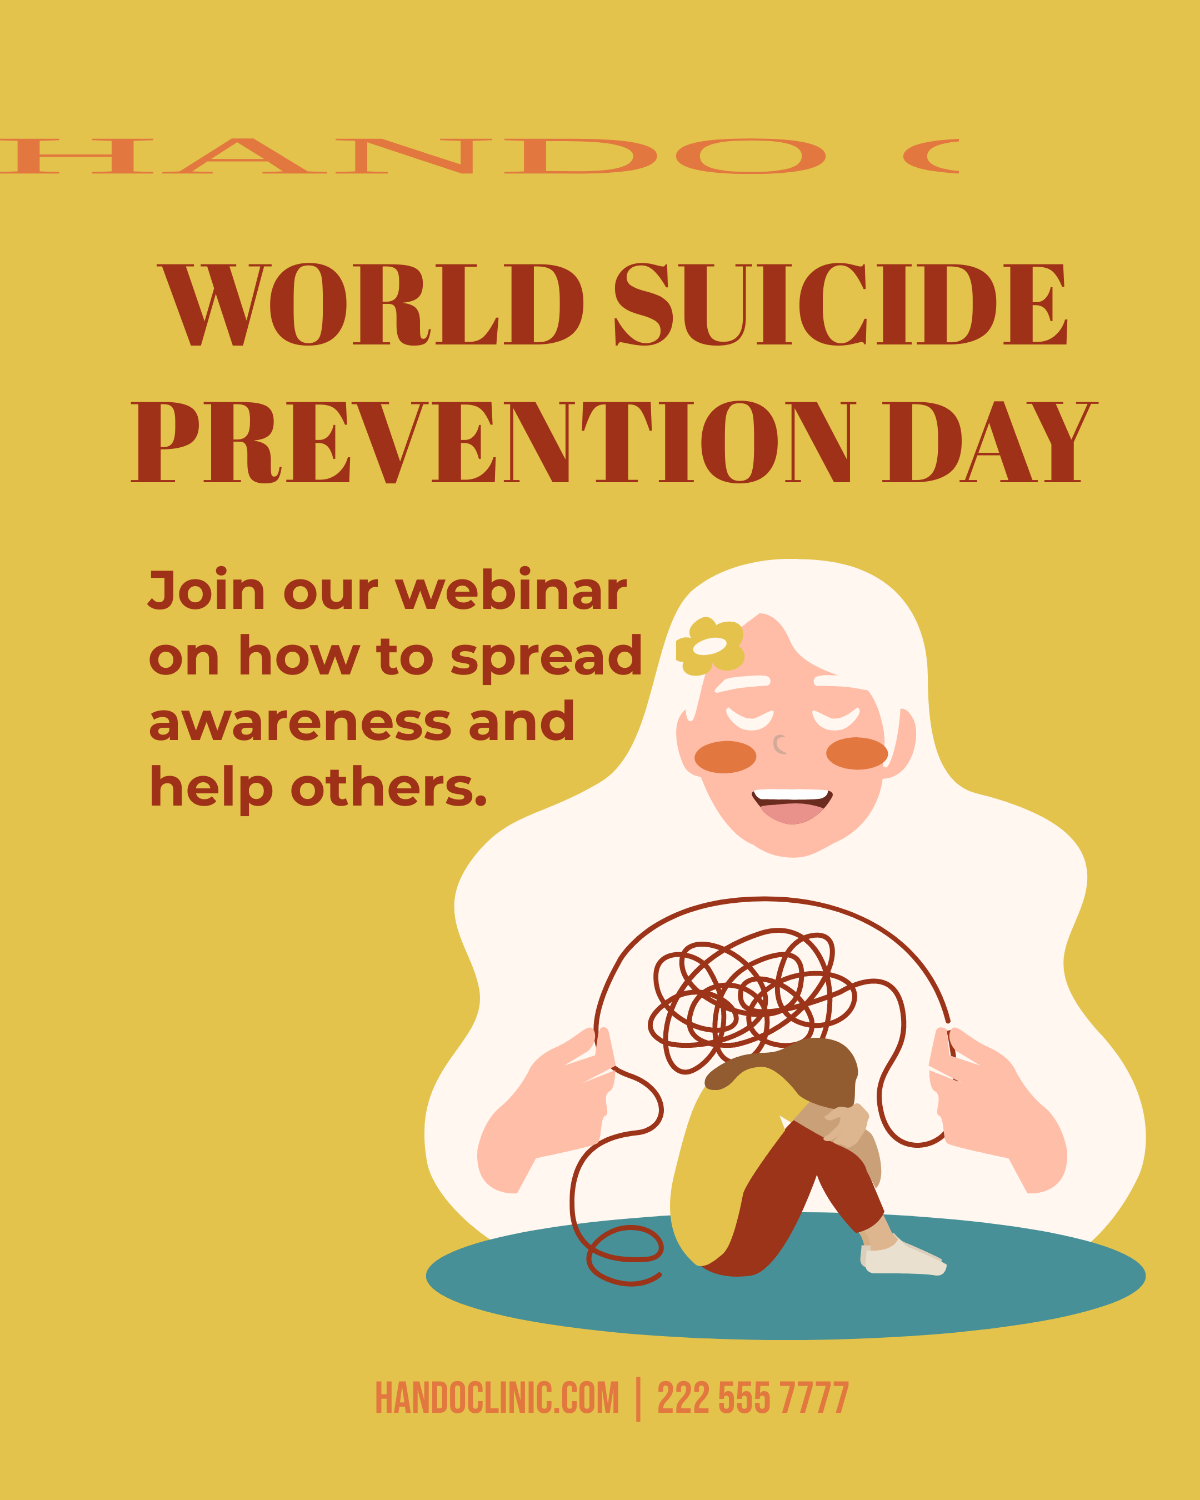 World Suicide Prevention Day Whatsapp Vertical Post